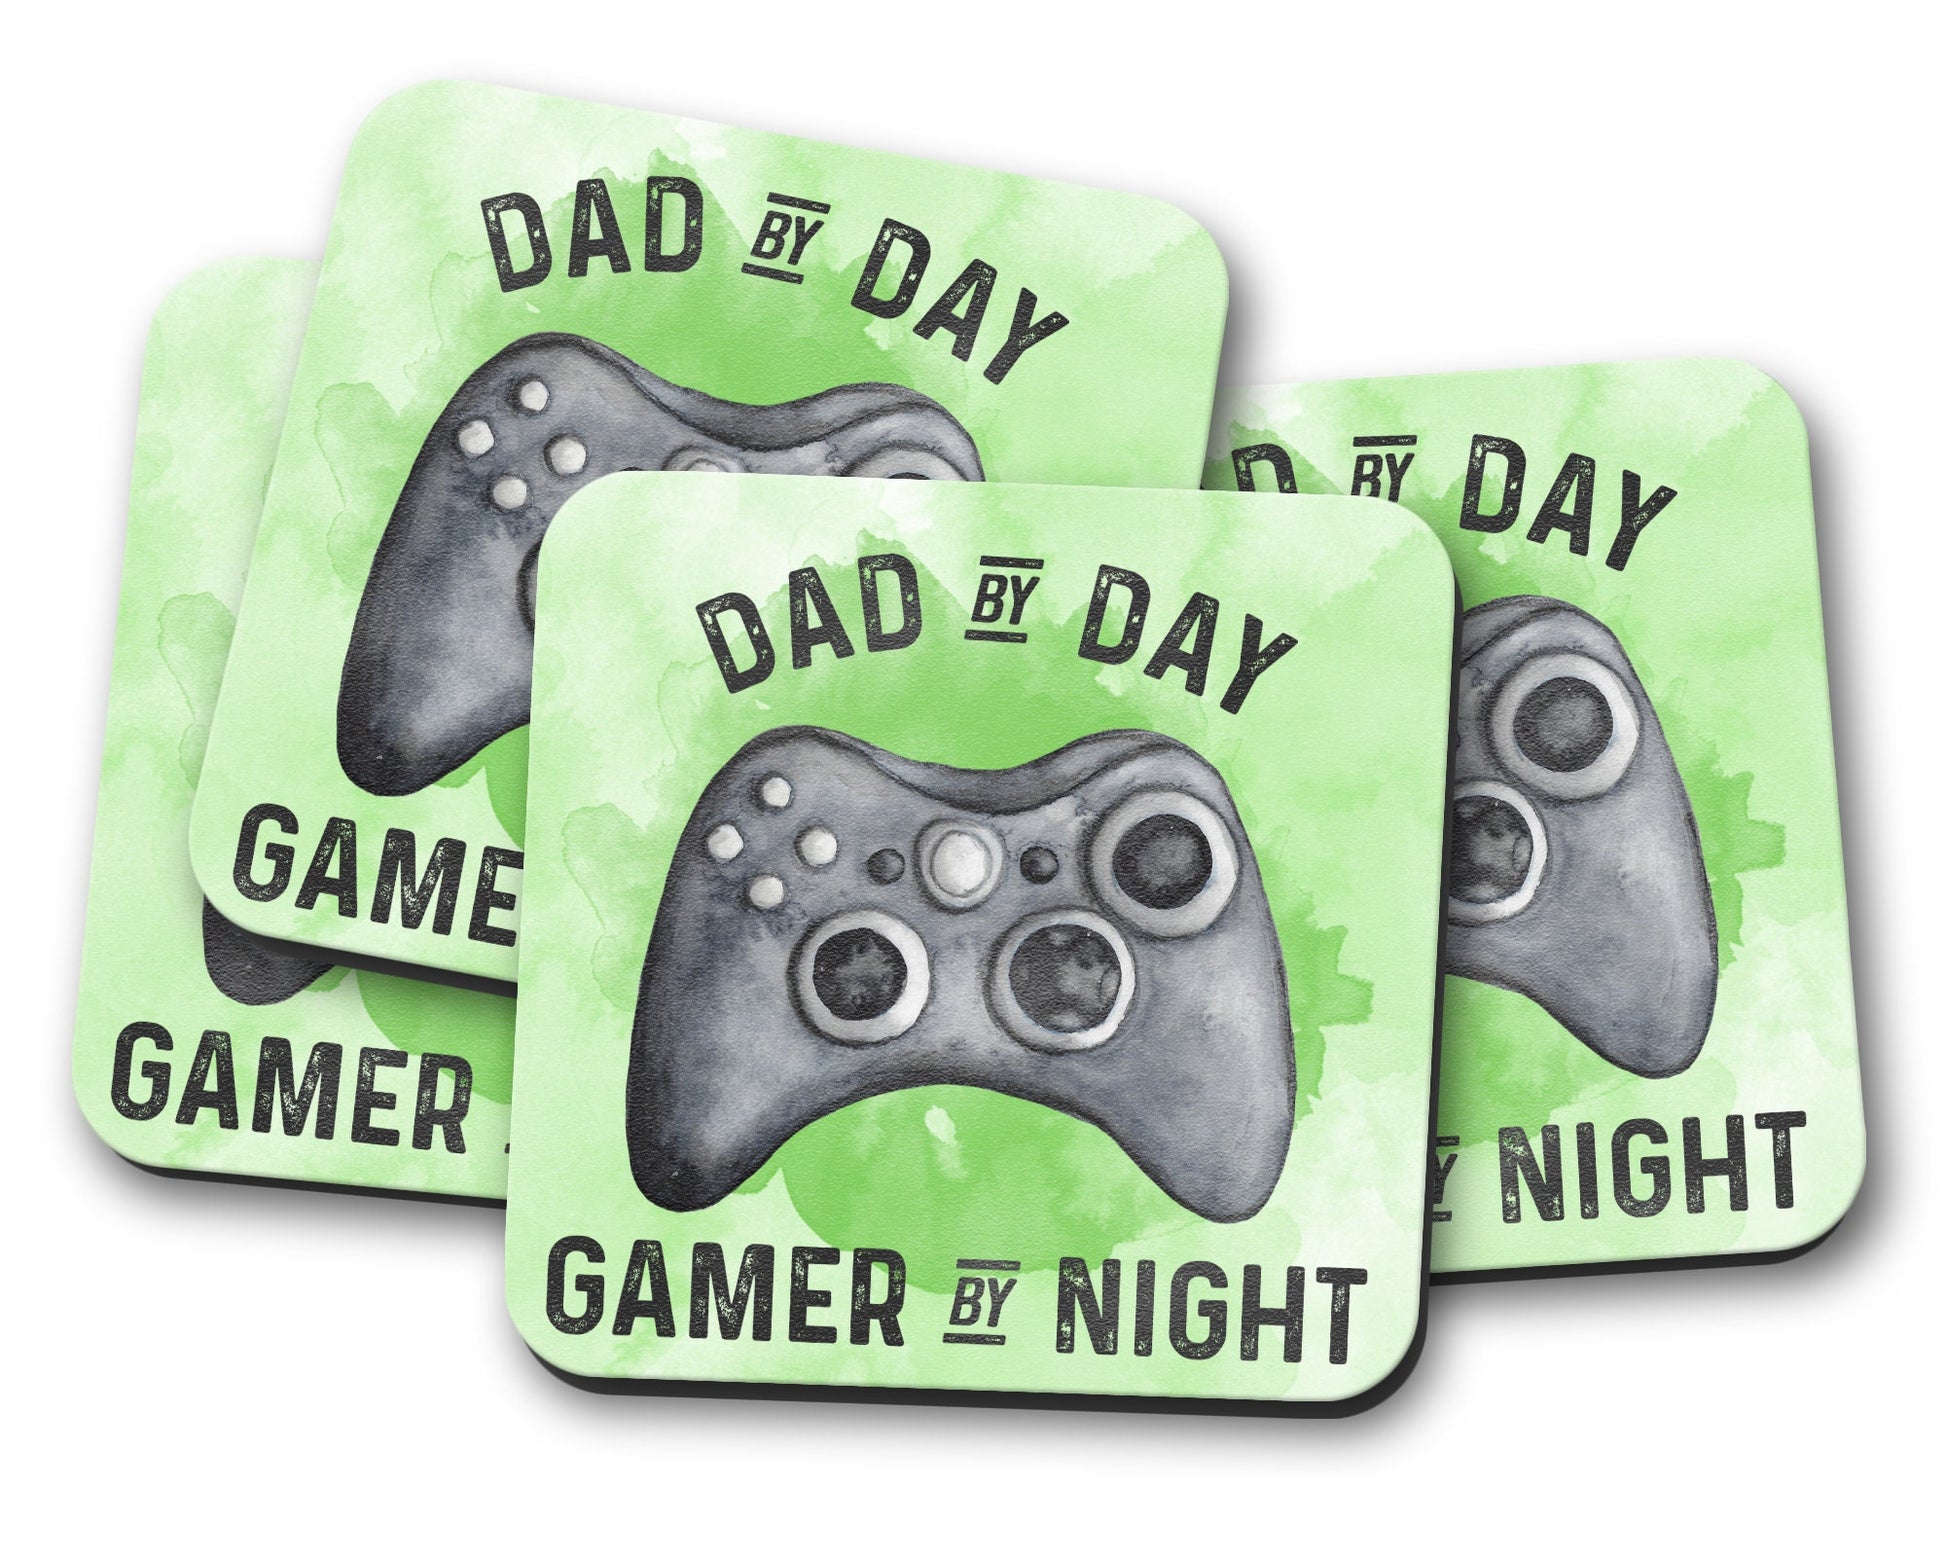 Hardboard coaster set featuring a gaming design with text that reads 'dad by day, gamer by night' in green